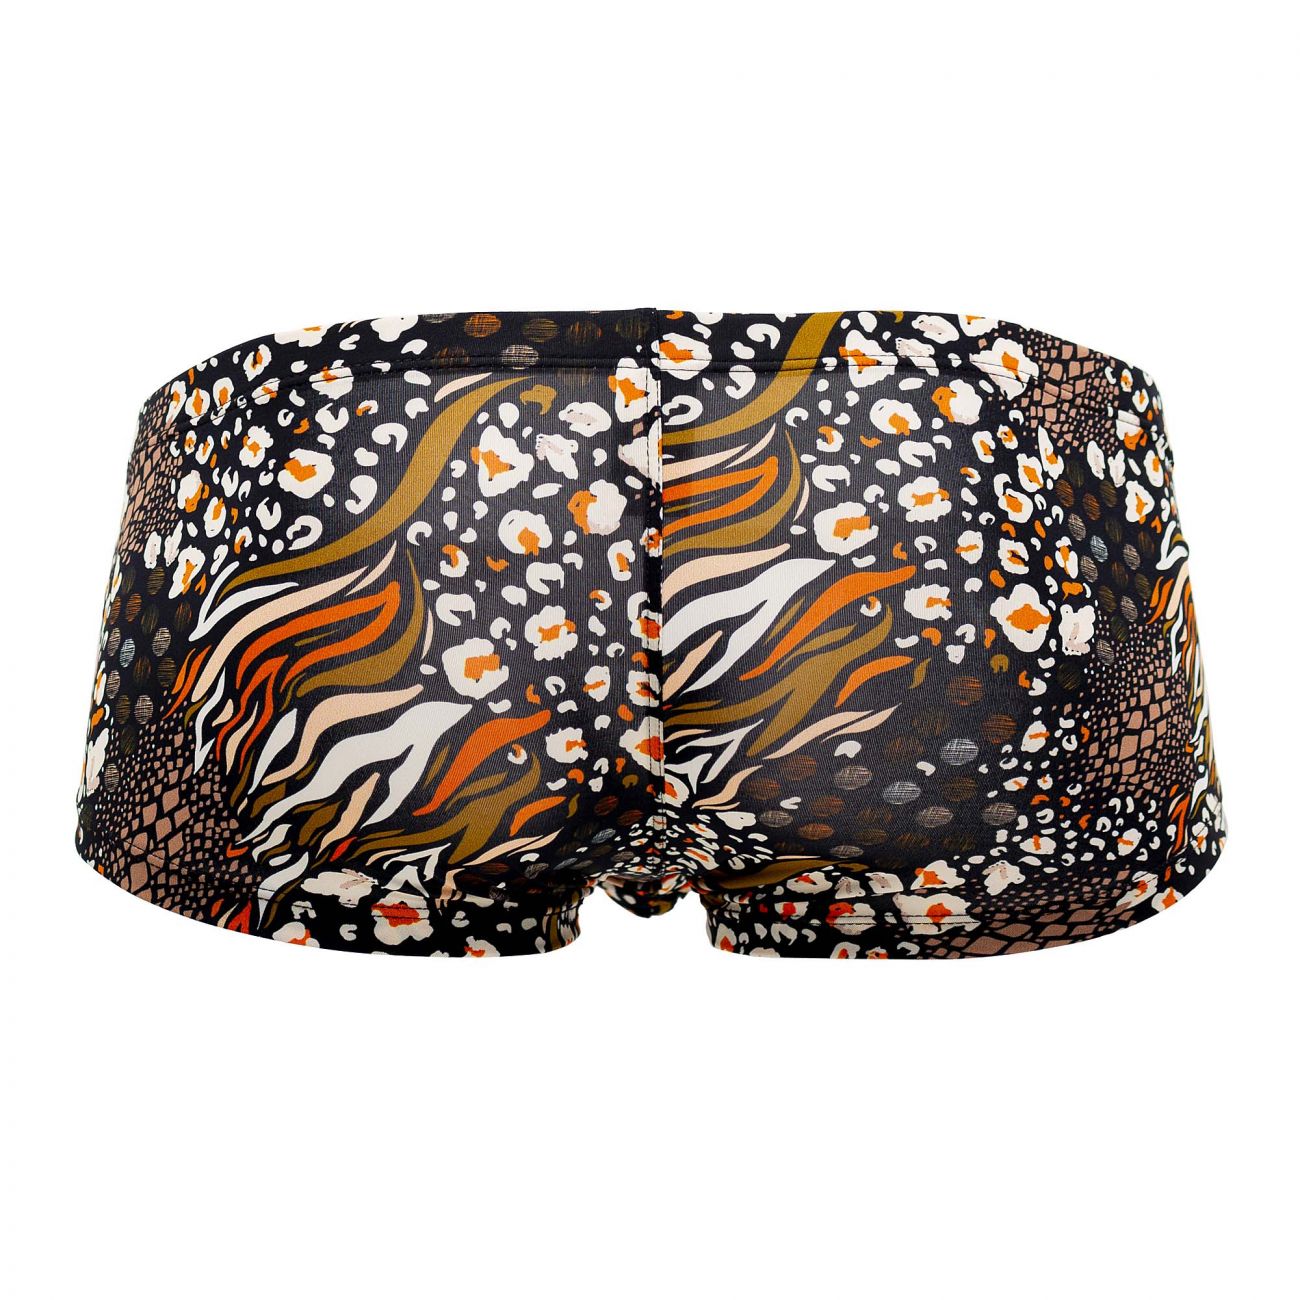 Clever 0573-1 Wild Trunks Black Printed